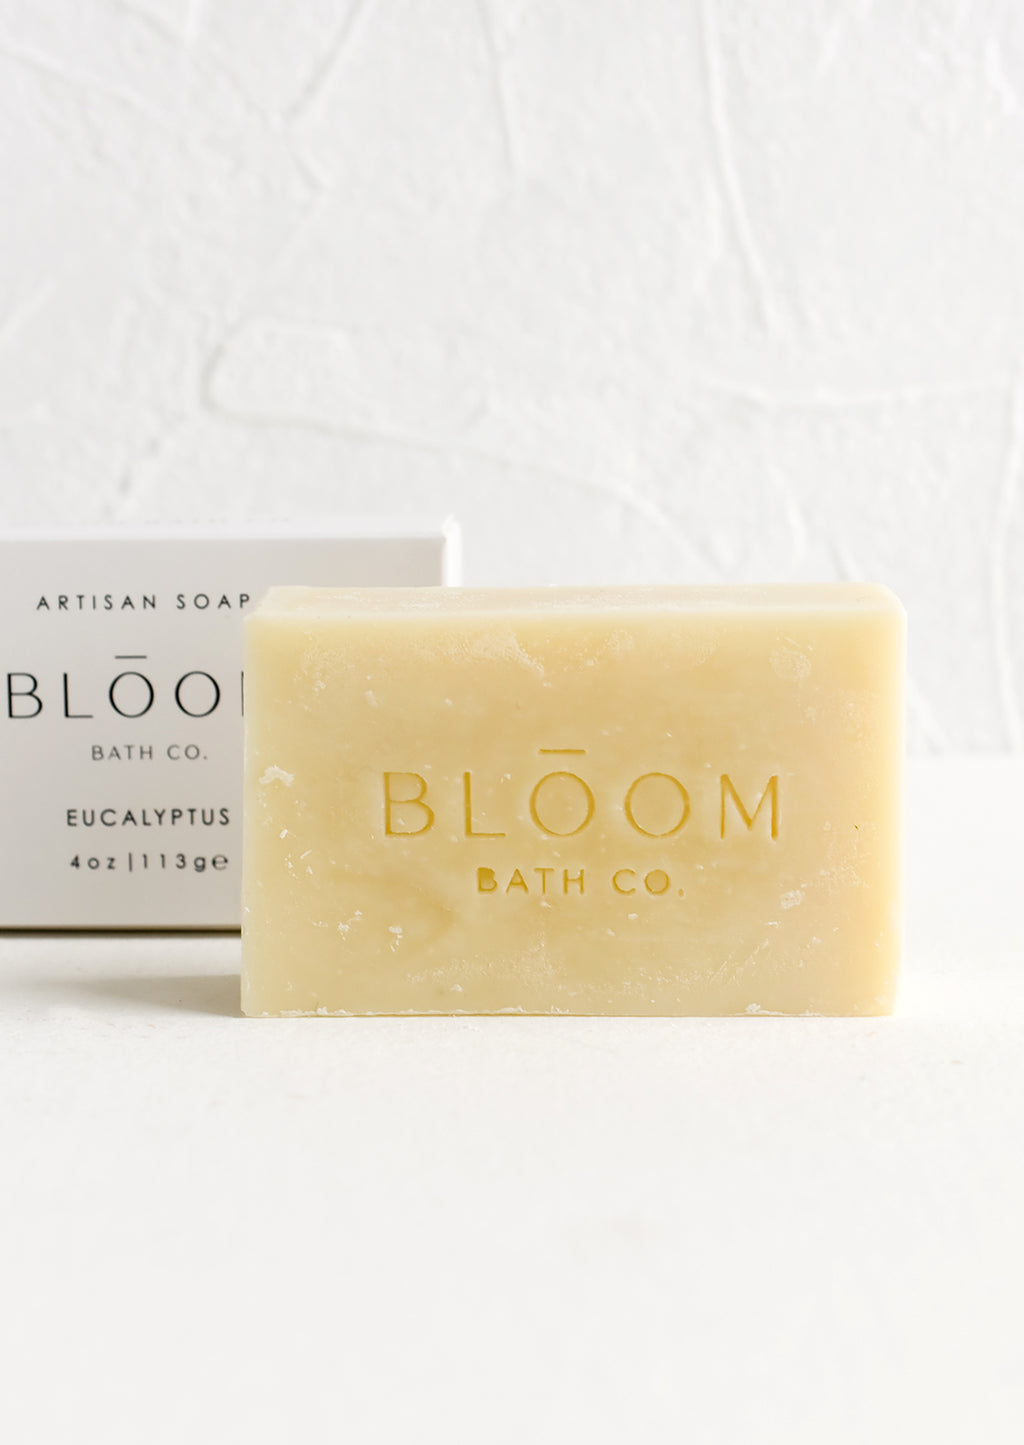 2: A bar of soap with minimalist packaging.